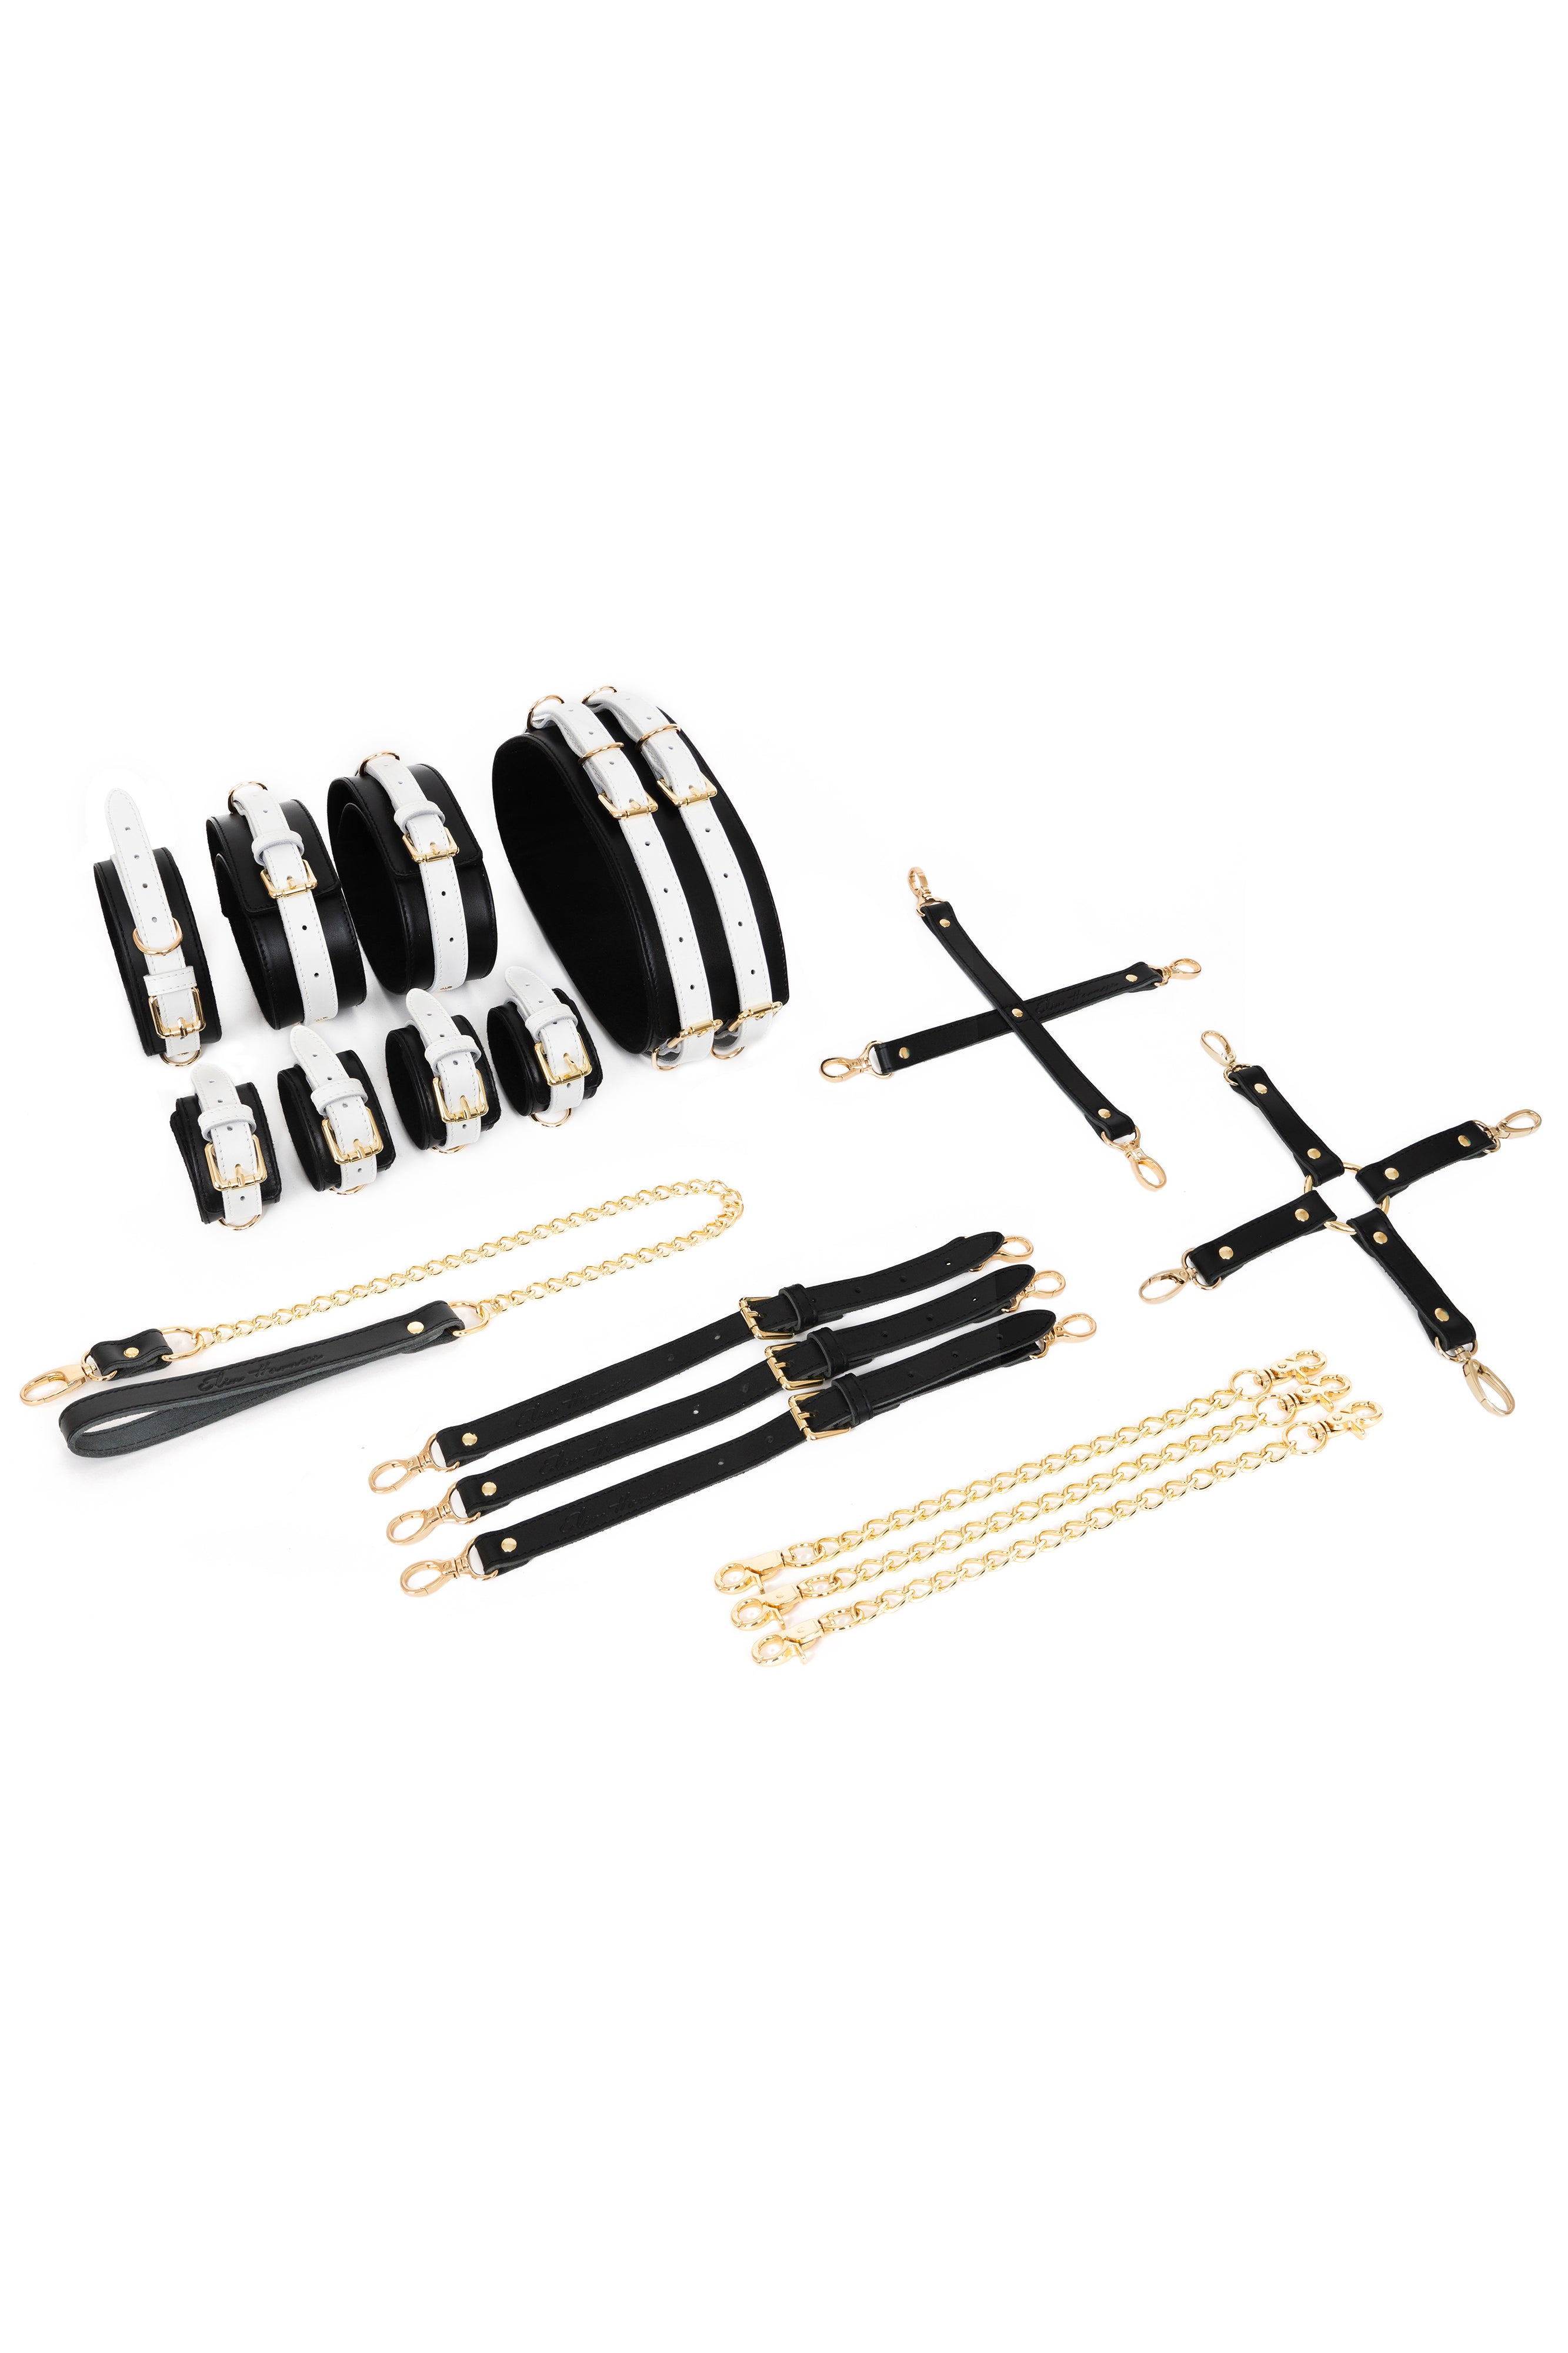 Black'n'White Full Leather Harness Bondage Set with Chain Connectors